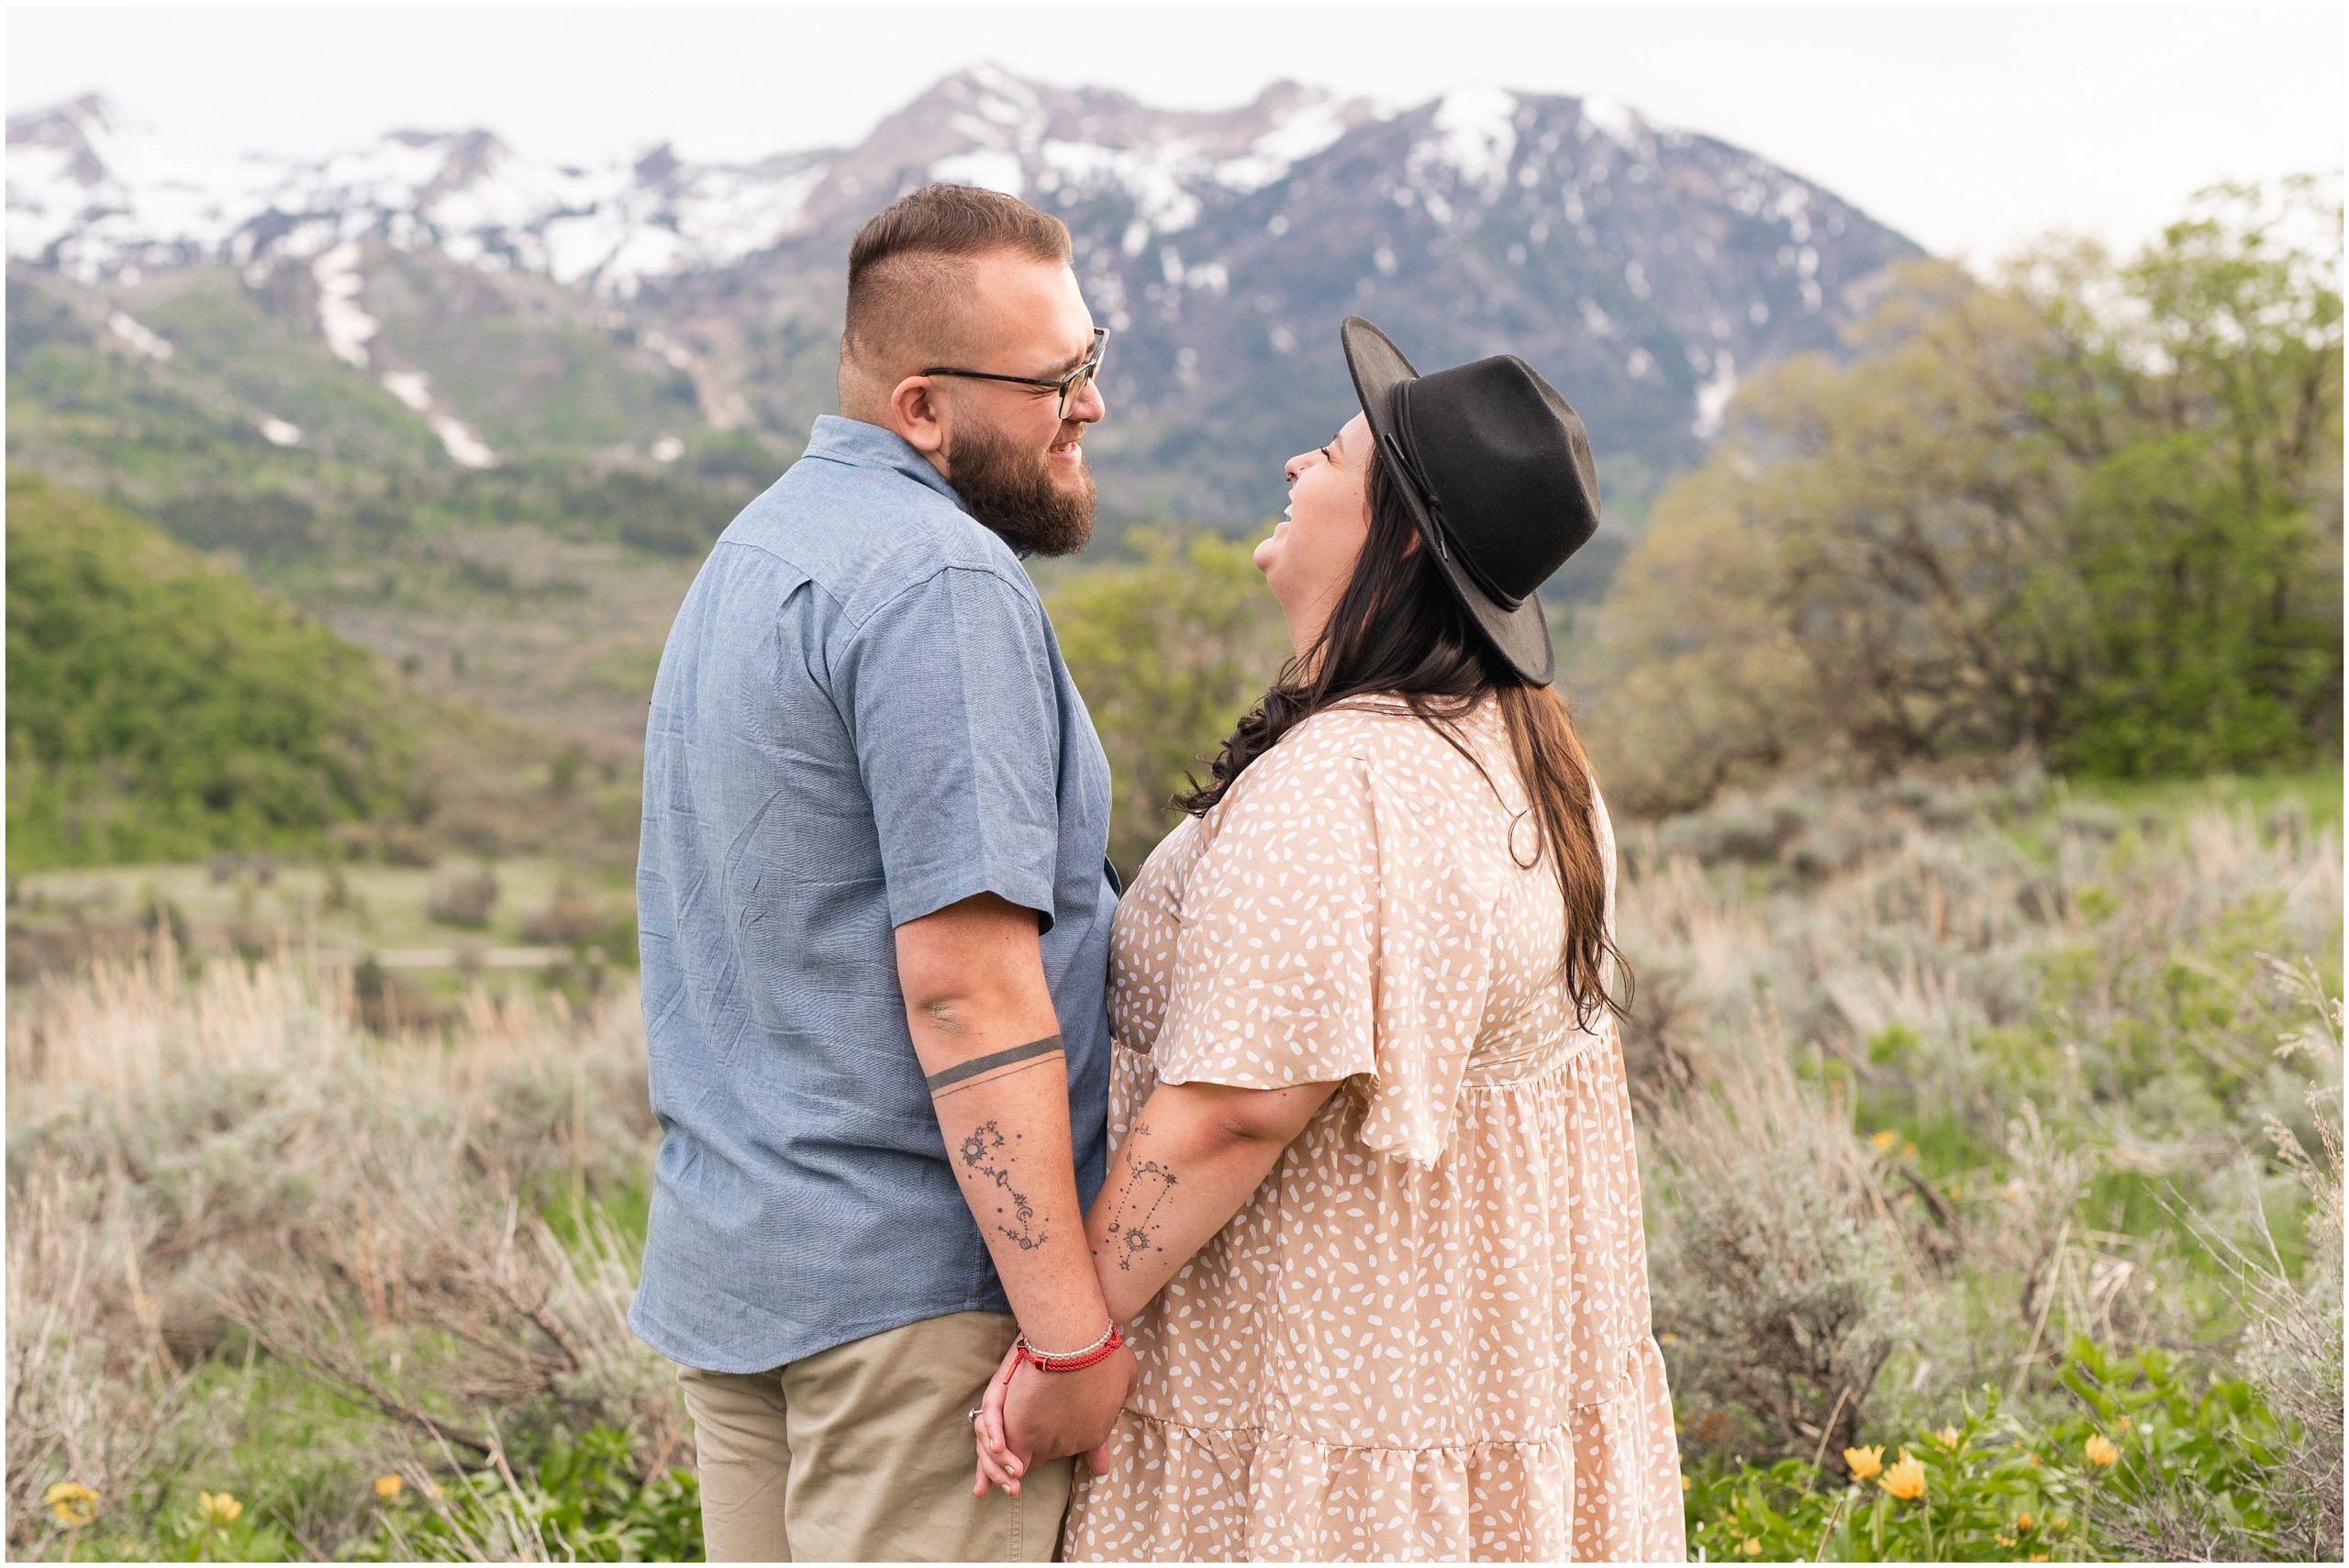 Couple during engagement session in yellow sunflower wildflowers surrounded by snowy mountain peaks | Ogden Valley Summer Engagement Session